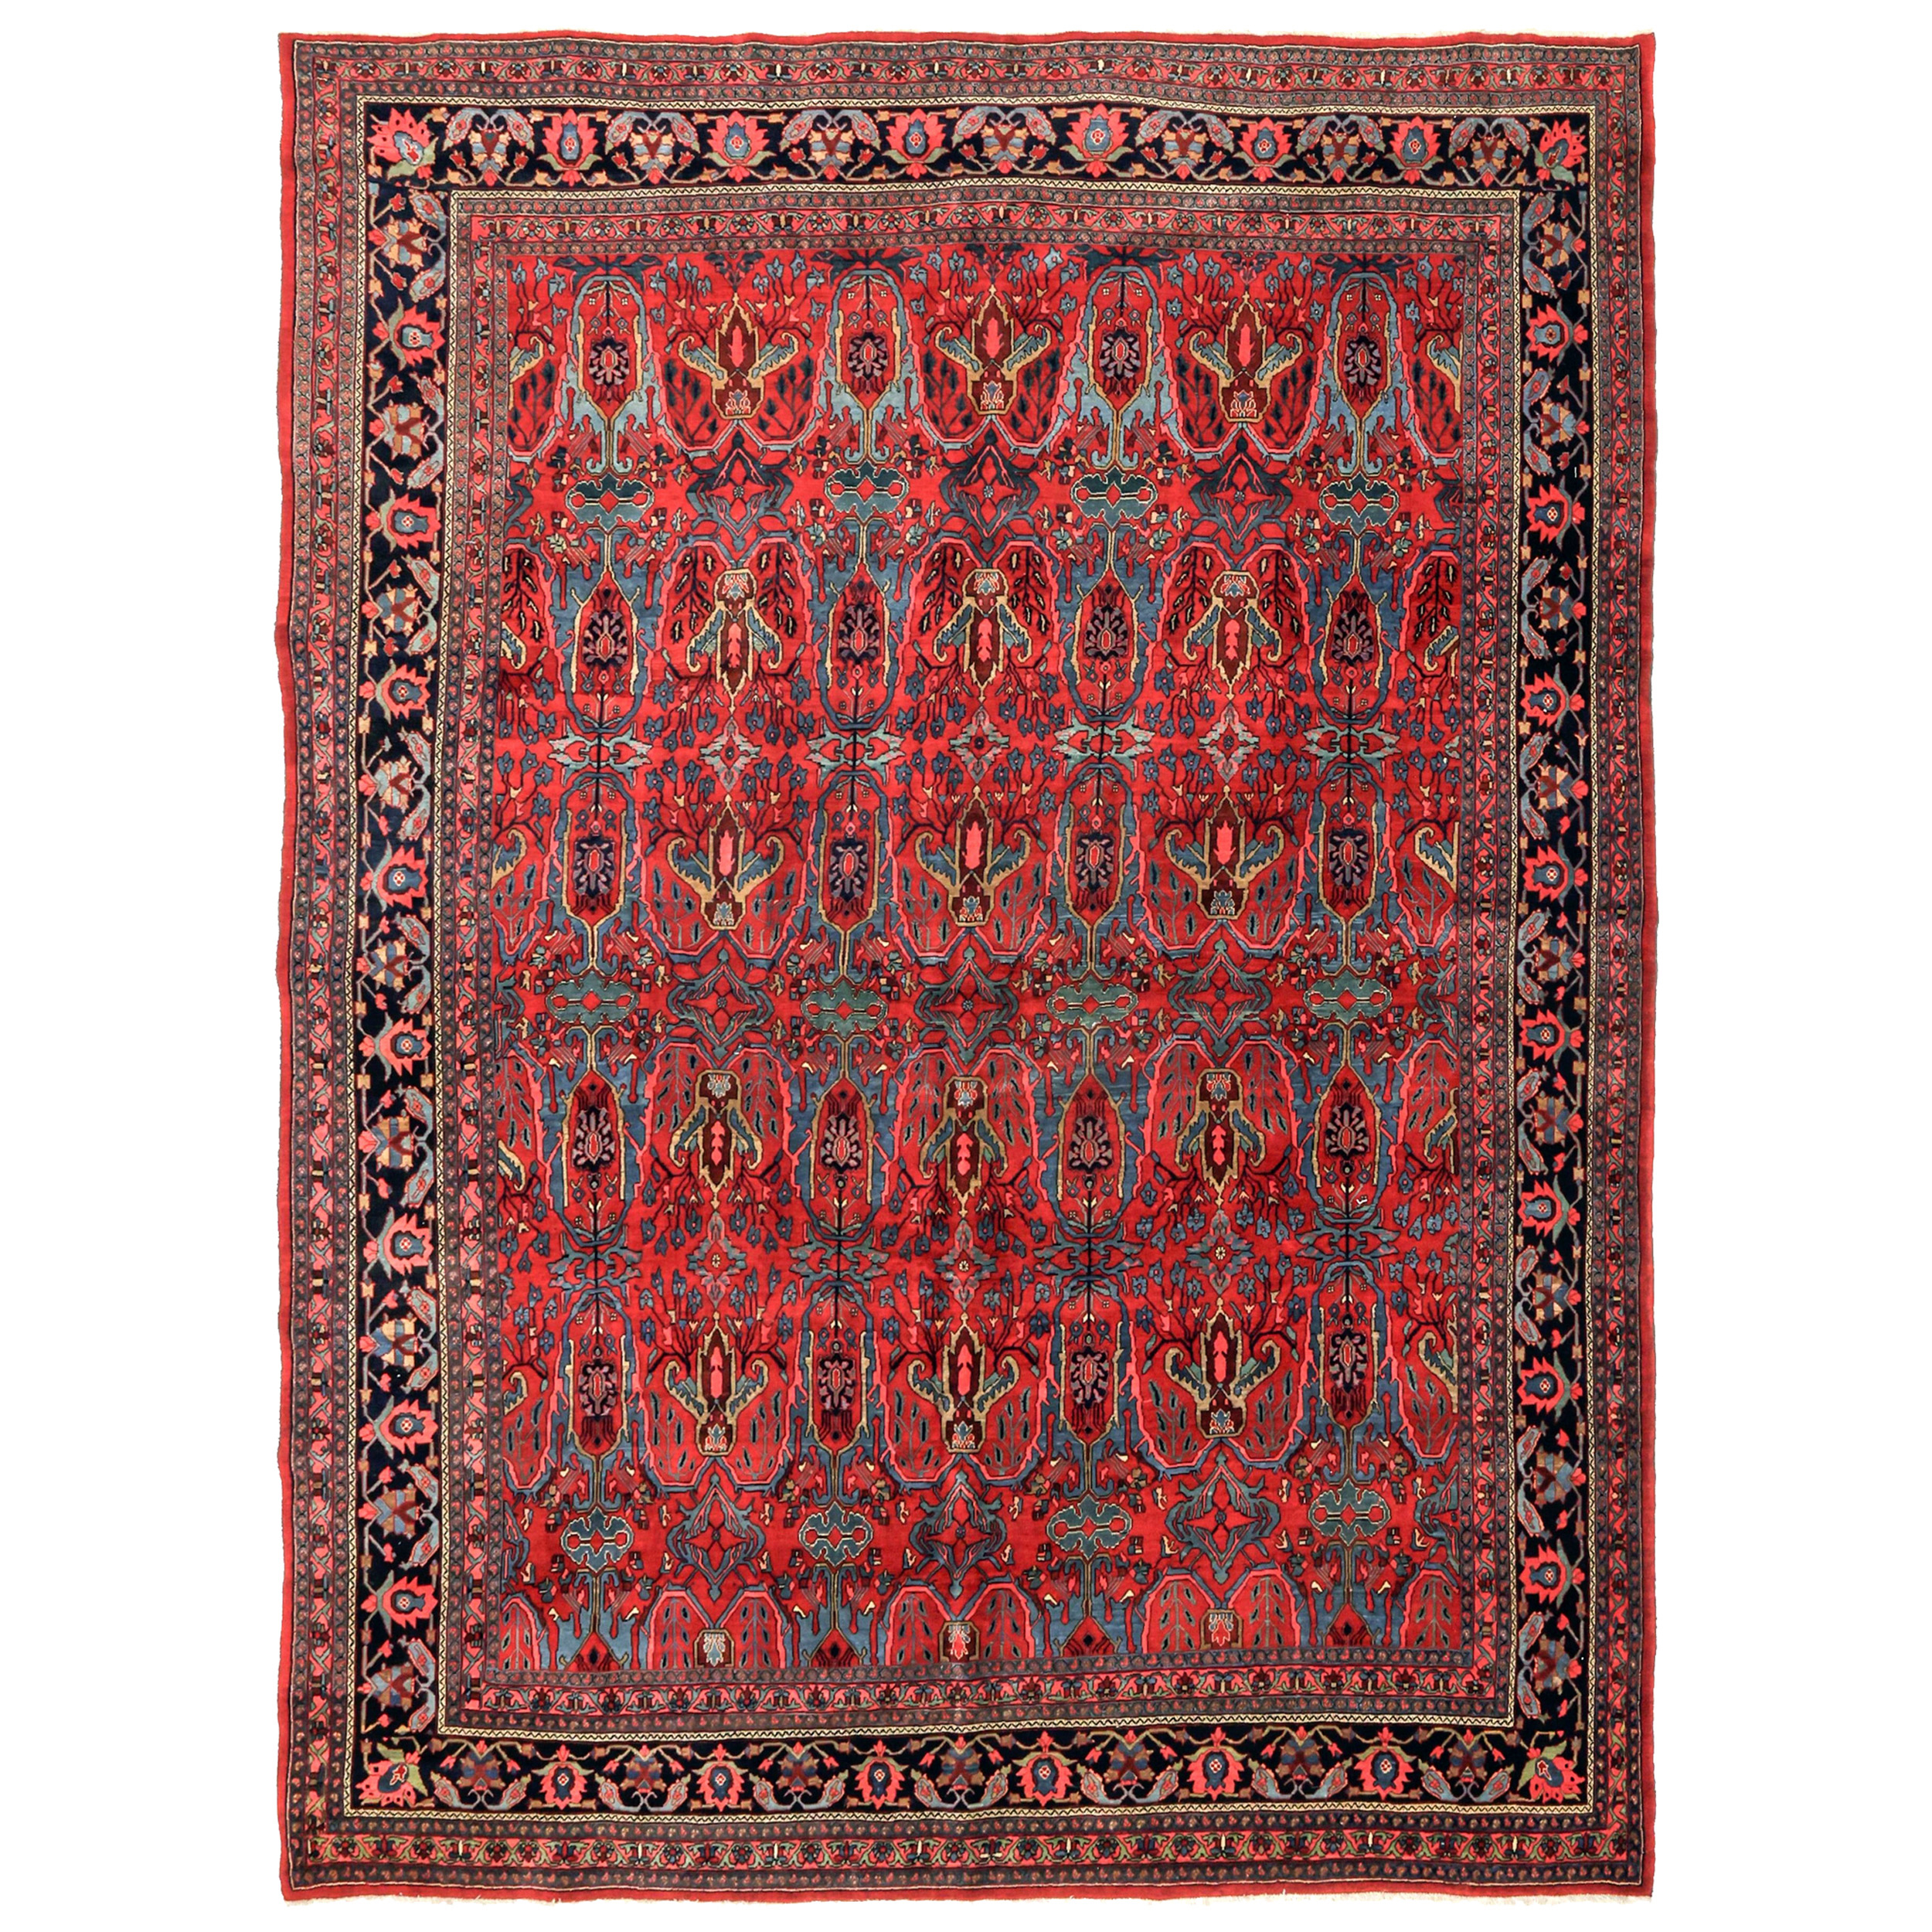 An antique Bidjar carpet with the Calyx design on a red field that is framed by a navy border, northwest Persia, circa 1910 - Douglas Stock Gallery specializes in antique Persian Bidjar rugs and carpets and other northwest Persian Kurdish rugs including senneh rugs and Kurdish nomadic rugs and bags. Antique Bidjar rugs, antique Persian Bidjar carpets